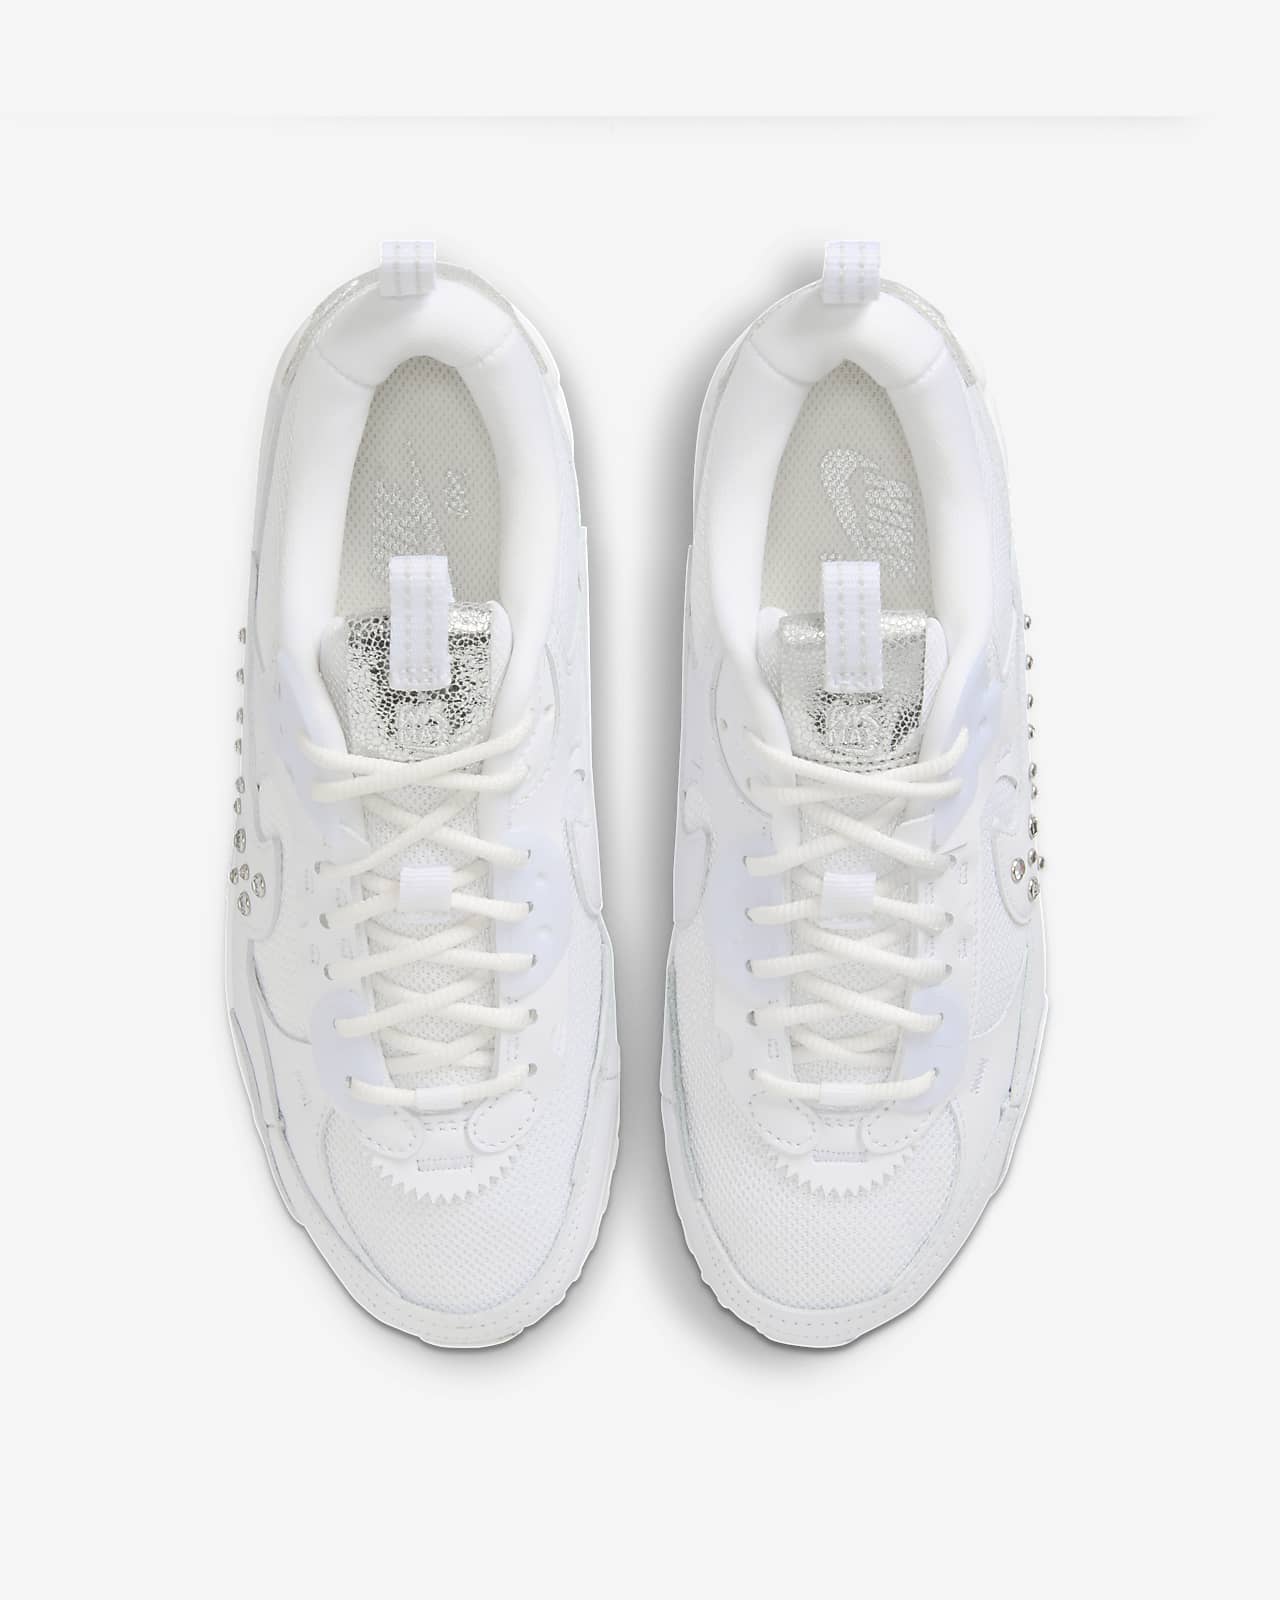 Nike Women's Air Max 90 Futura Shoes in White, Size: 5 | FQ8888-100